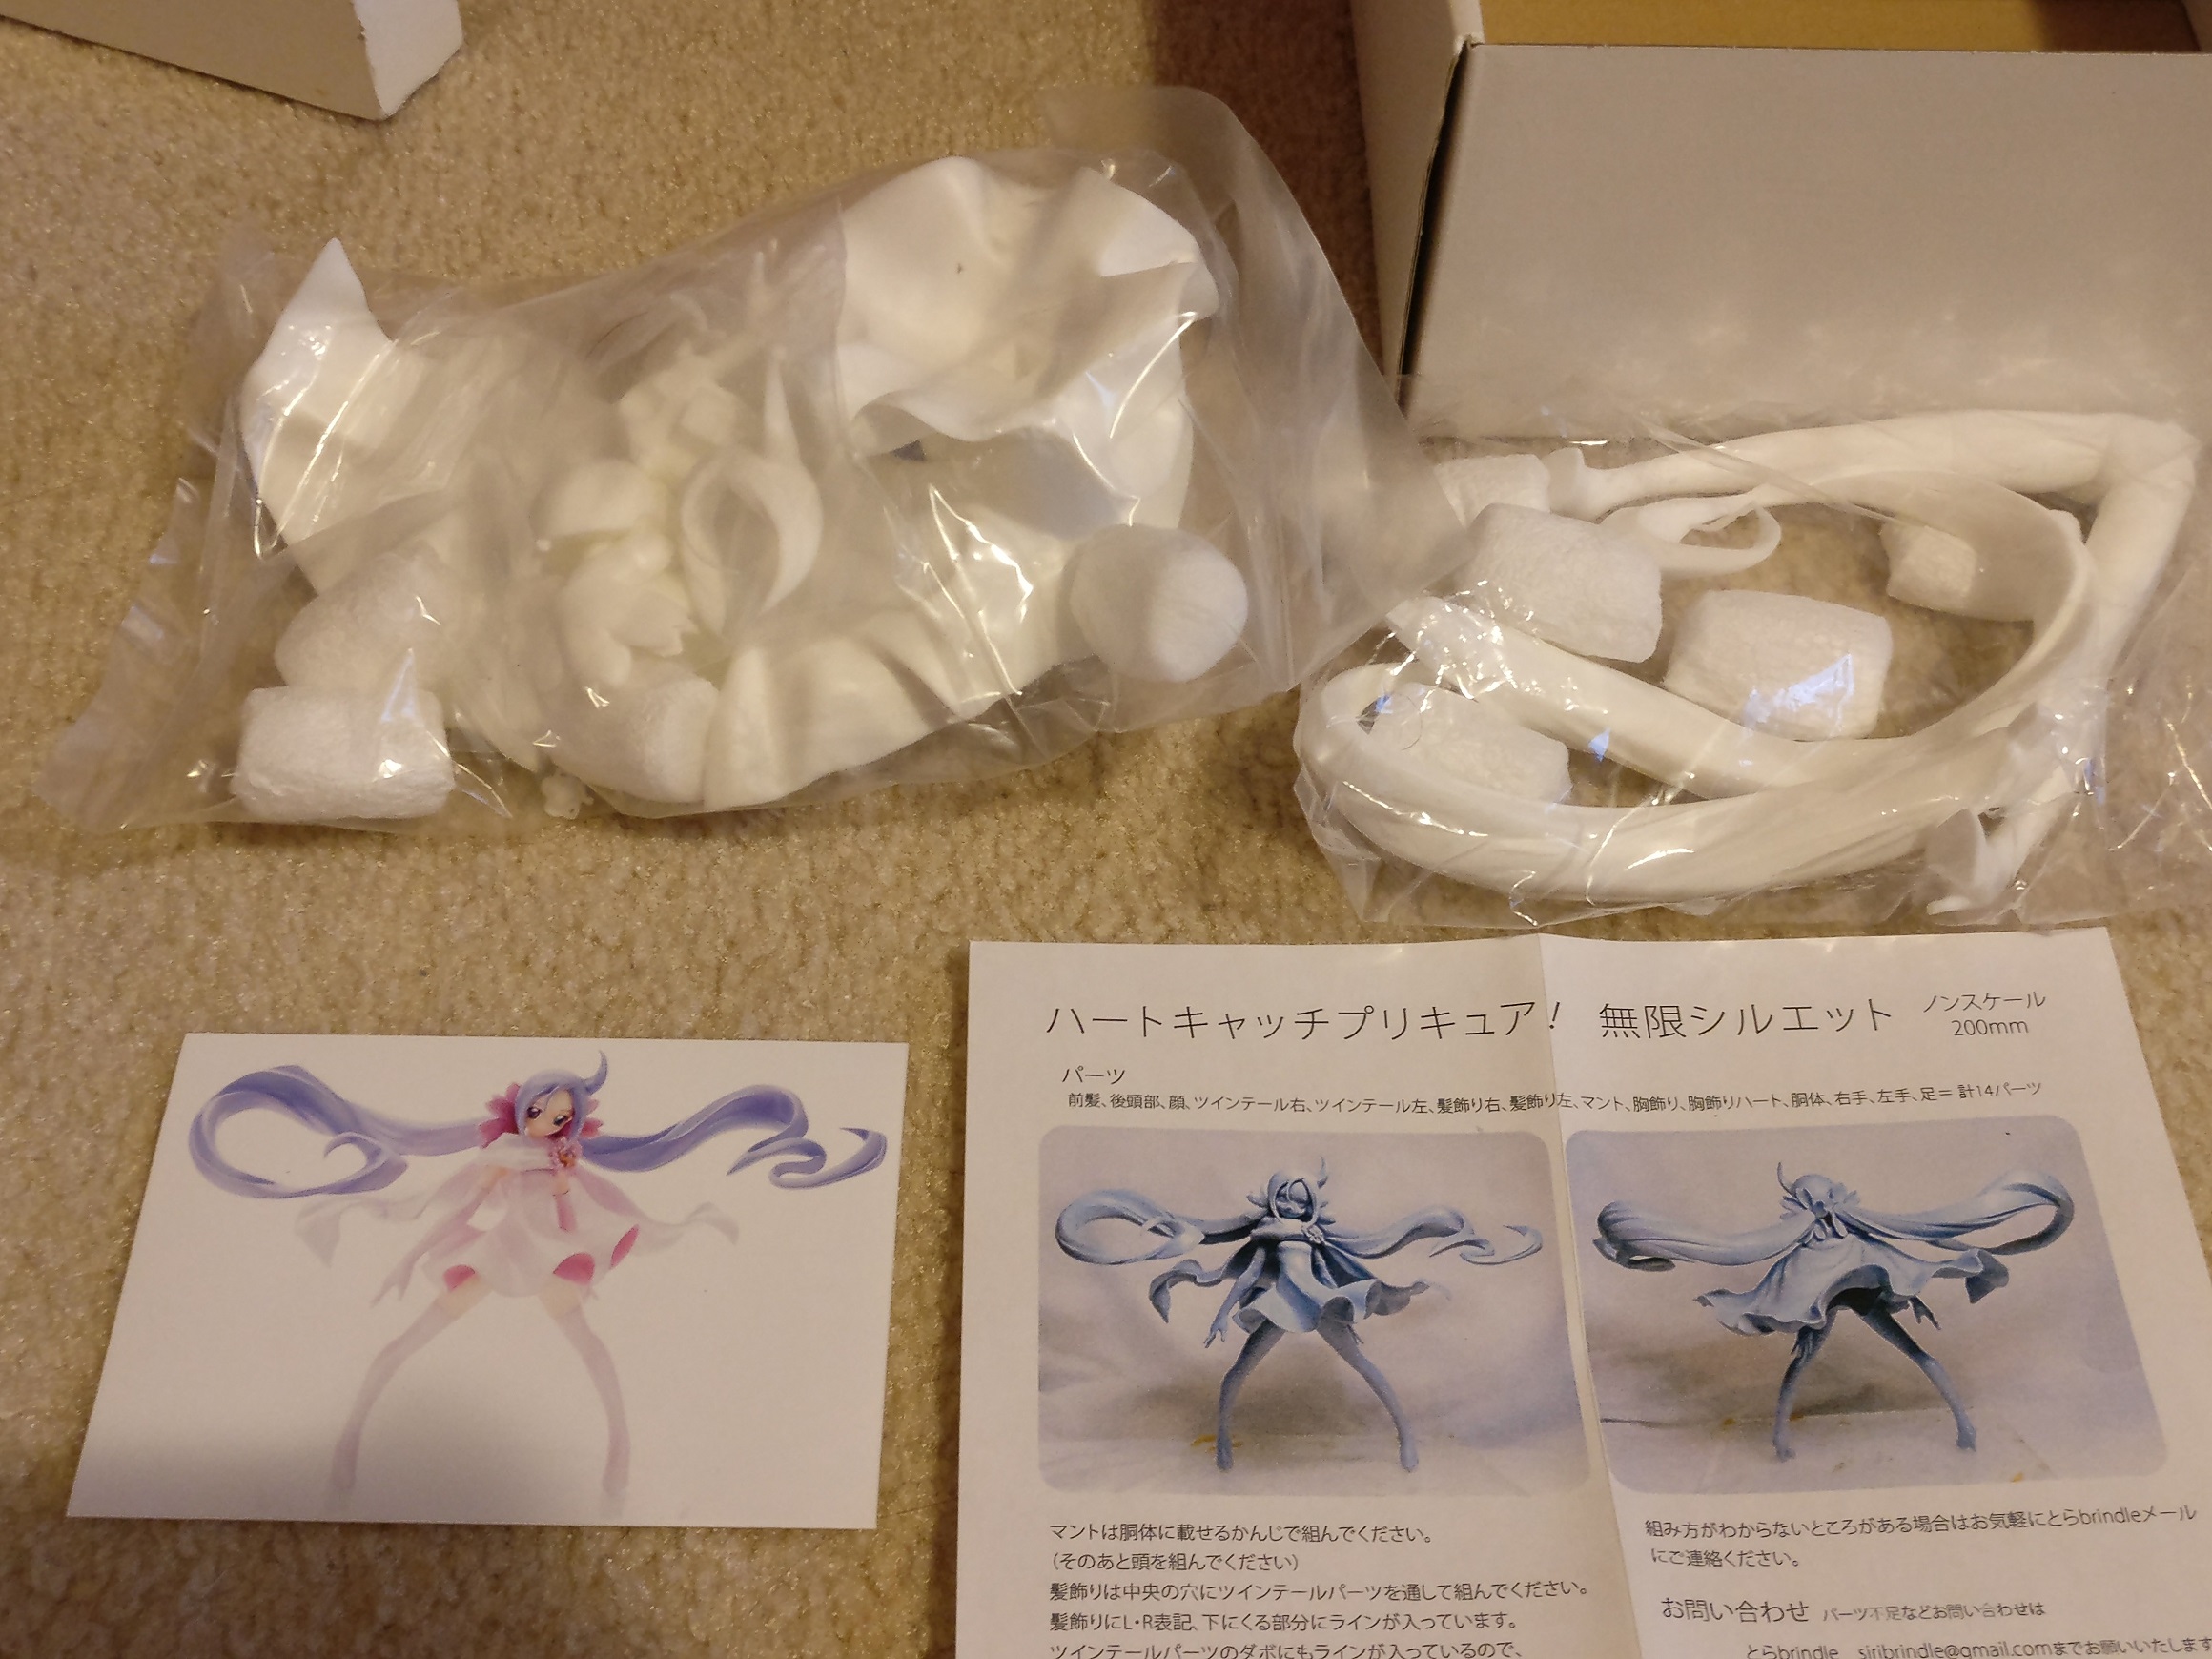 Infinity Silhouette Precure Heartcatch Finished Garage Kit Myfigurecollection Net